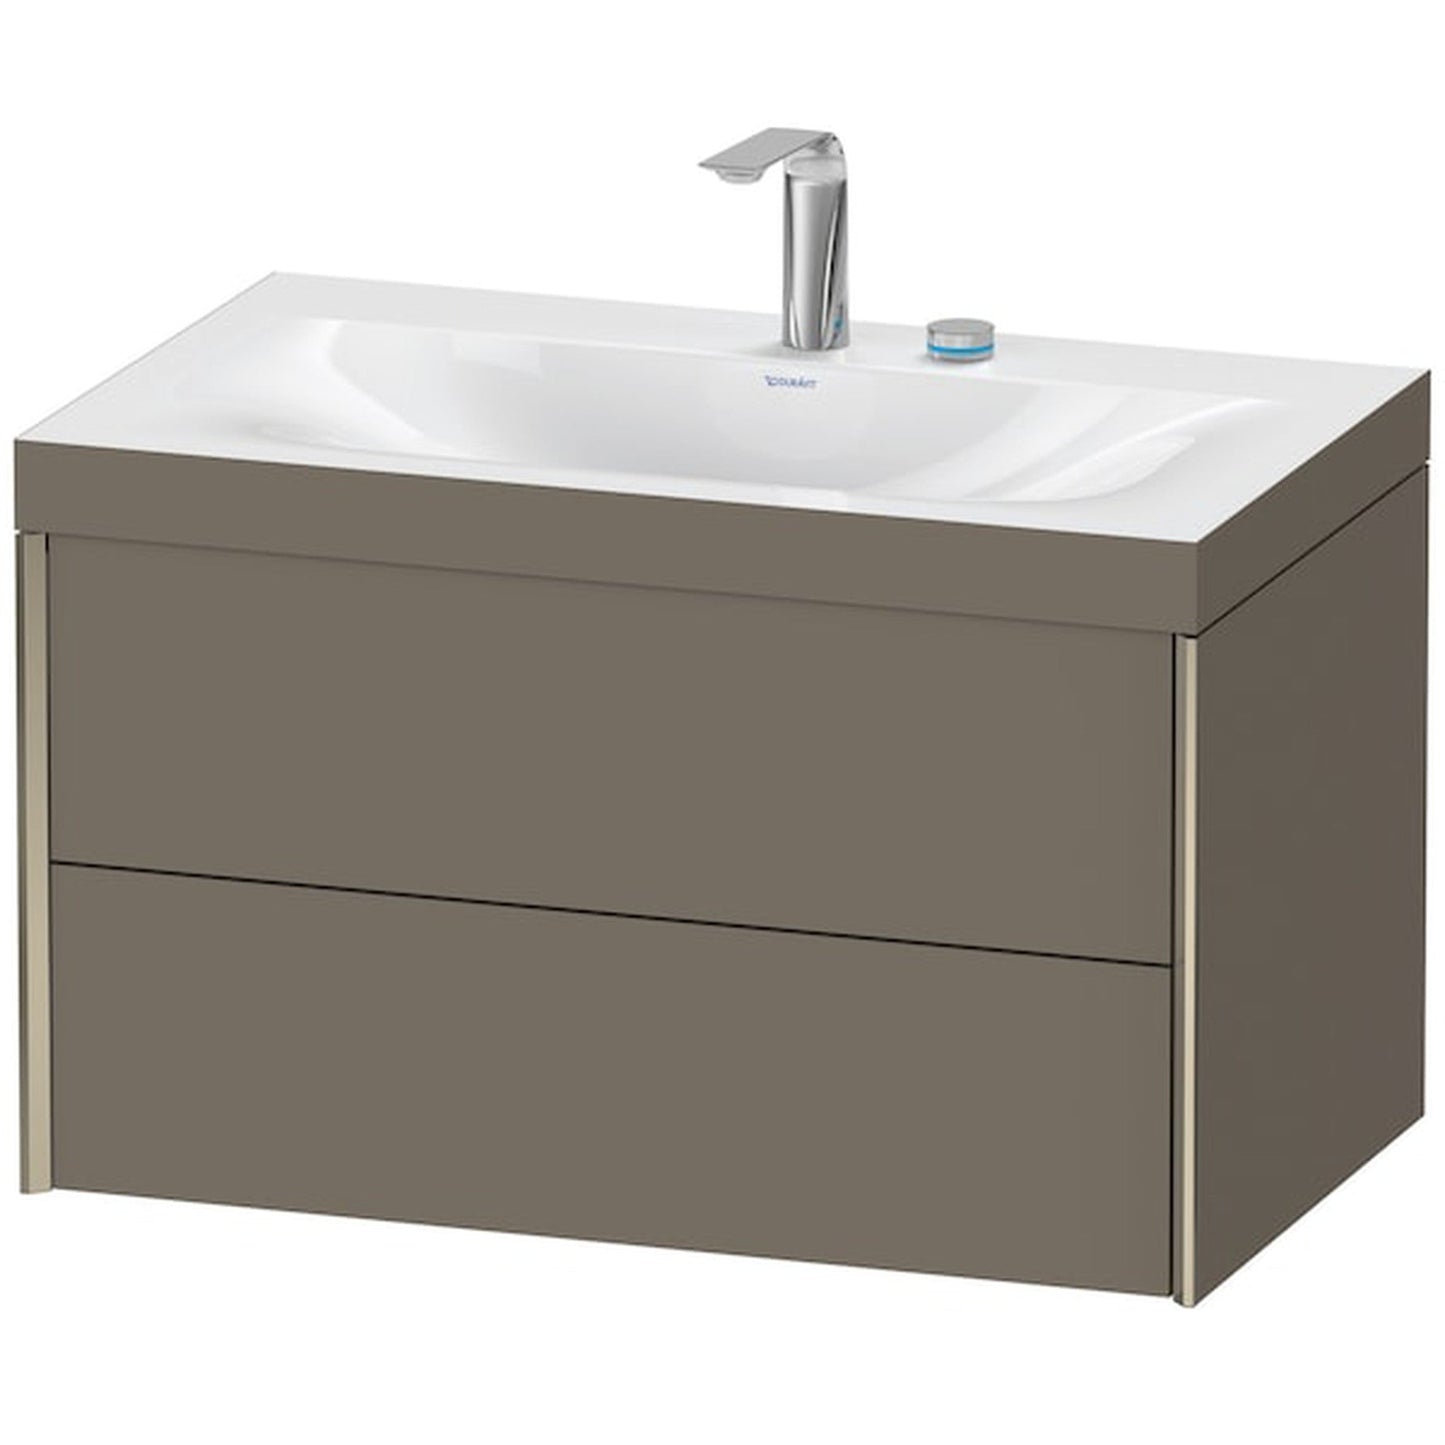 Duravit Xviu 31" x 20" x 19" Two Drawer C-Bonded Wall-Mount Vanity Kit With Two Tap Holes, Flannel Gray (XV4615EB190C)